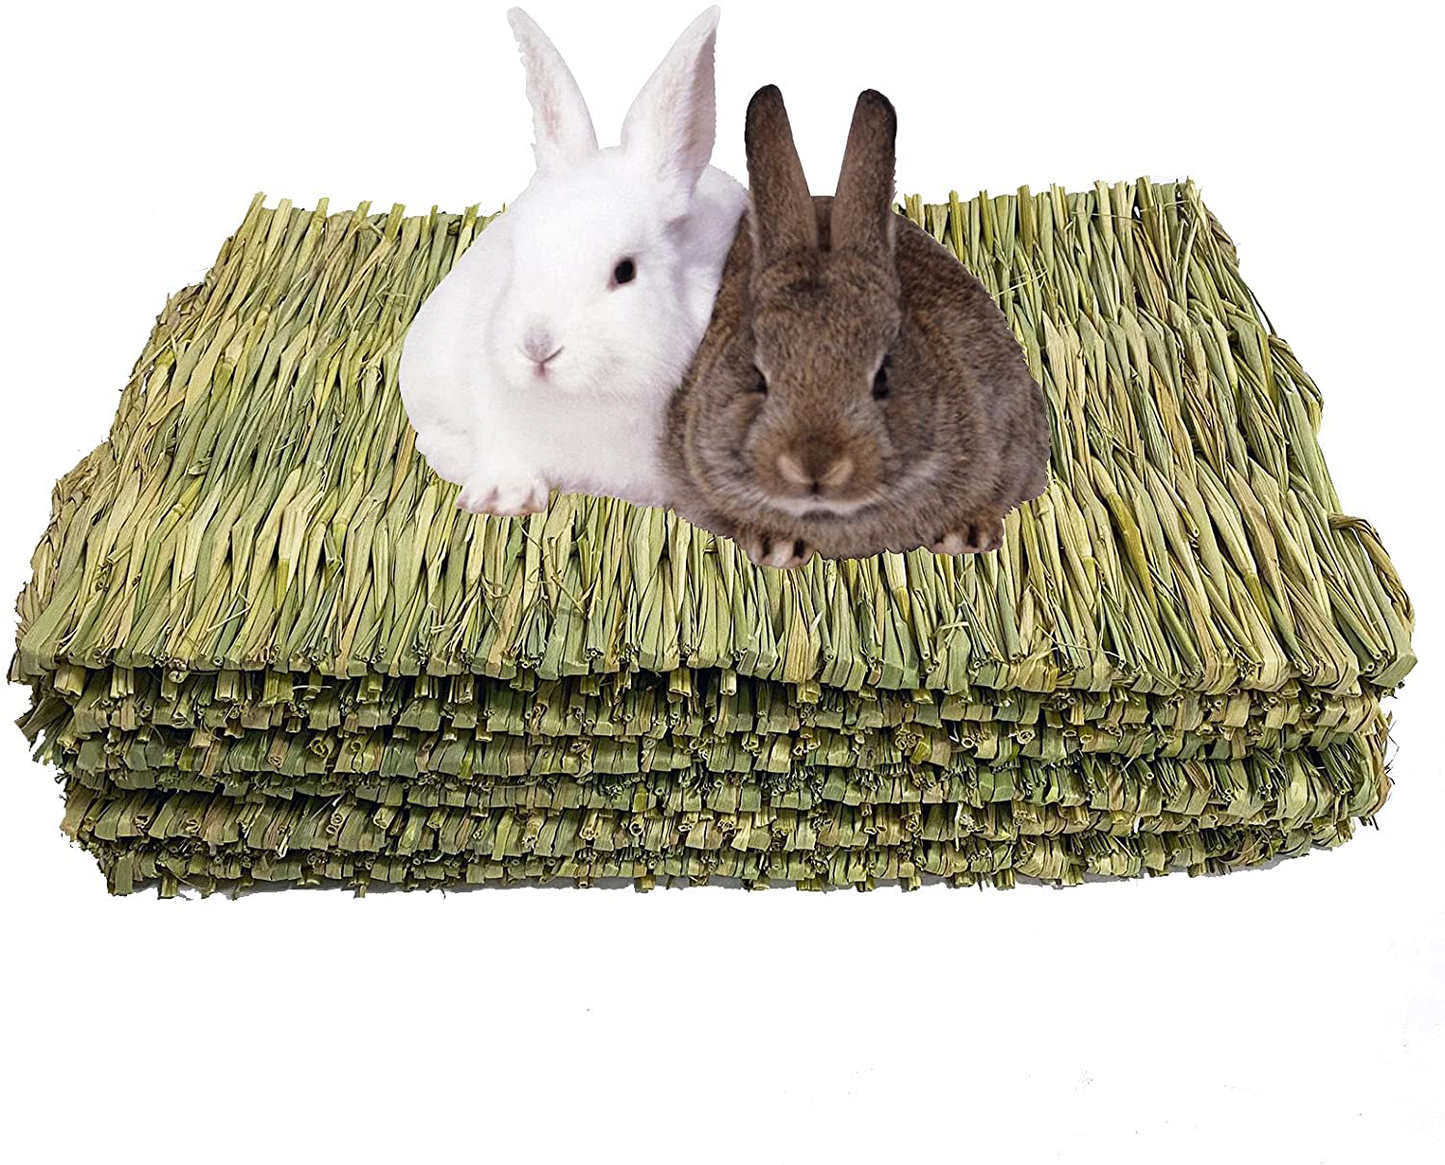 Kathson 6 PCS Rabbit Large Grass Mat Natural Grass Woven Mat Rabbits Chew Toys Grass Bedding Nest for Small Animal Bunny Rabbit Guinea Pigs Hamster Chinchillas Puppy Biddy Sleeping Chewing